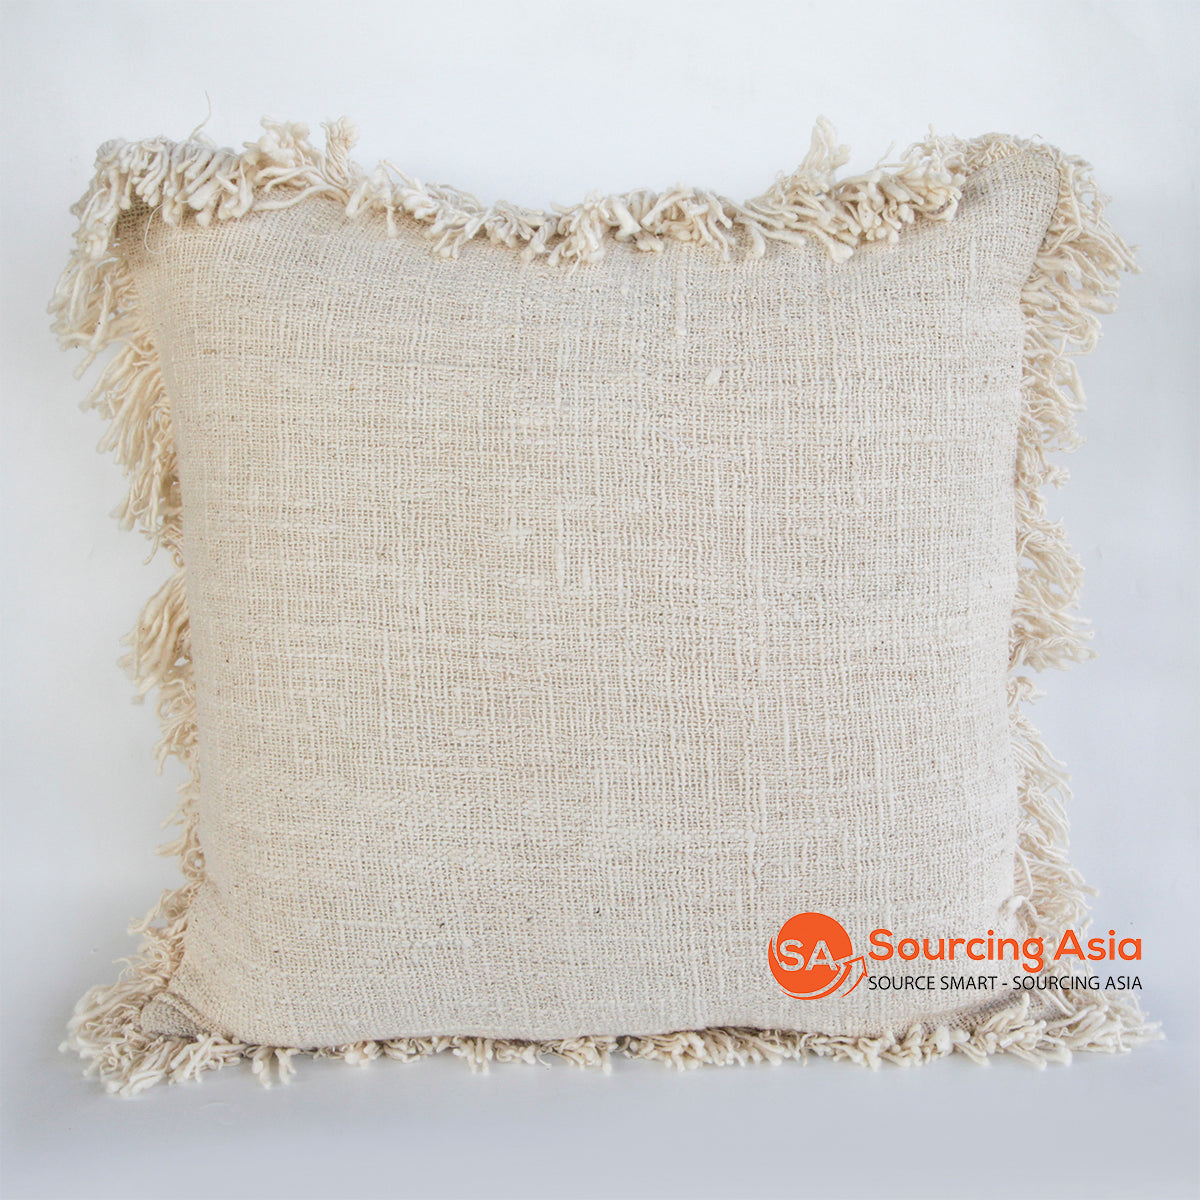 HIP032 NATURAL TUMANGGAL FABRIC SQUARE COVER CUSHION WITH FRINGE (PRICE WITHOUT INNER)